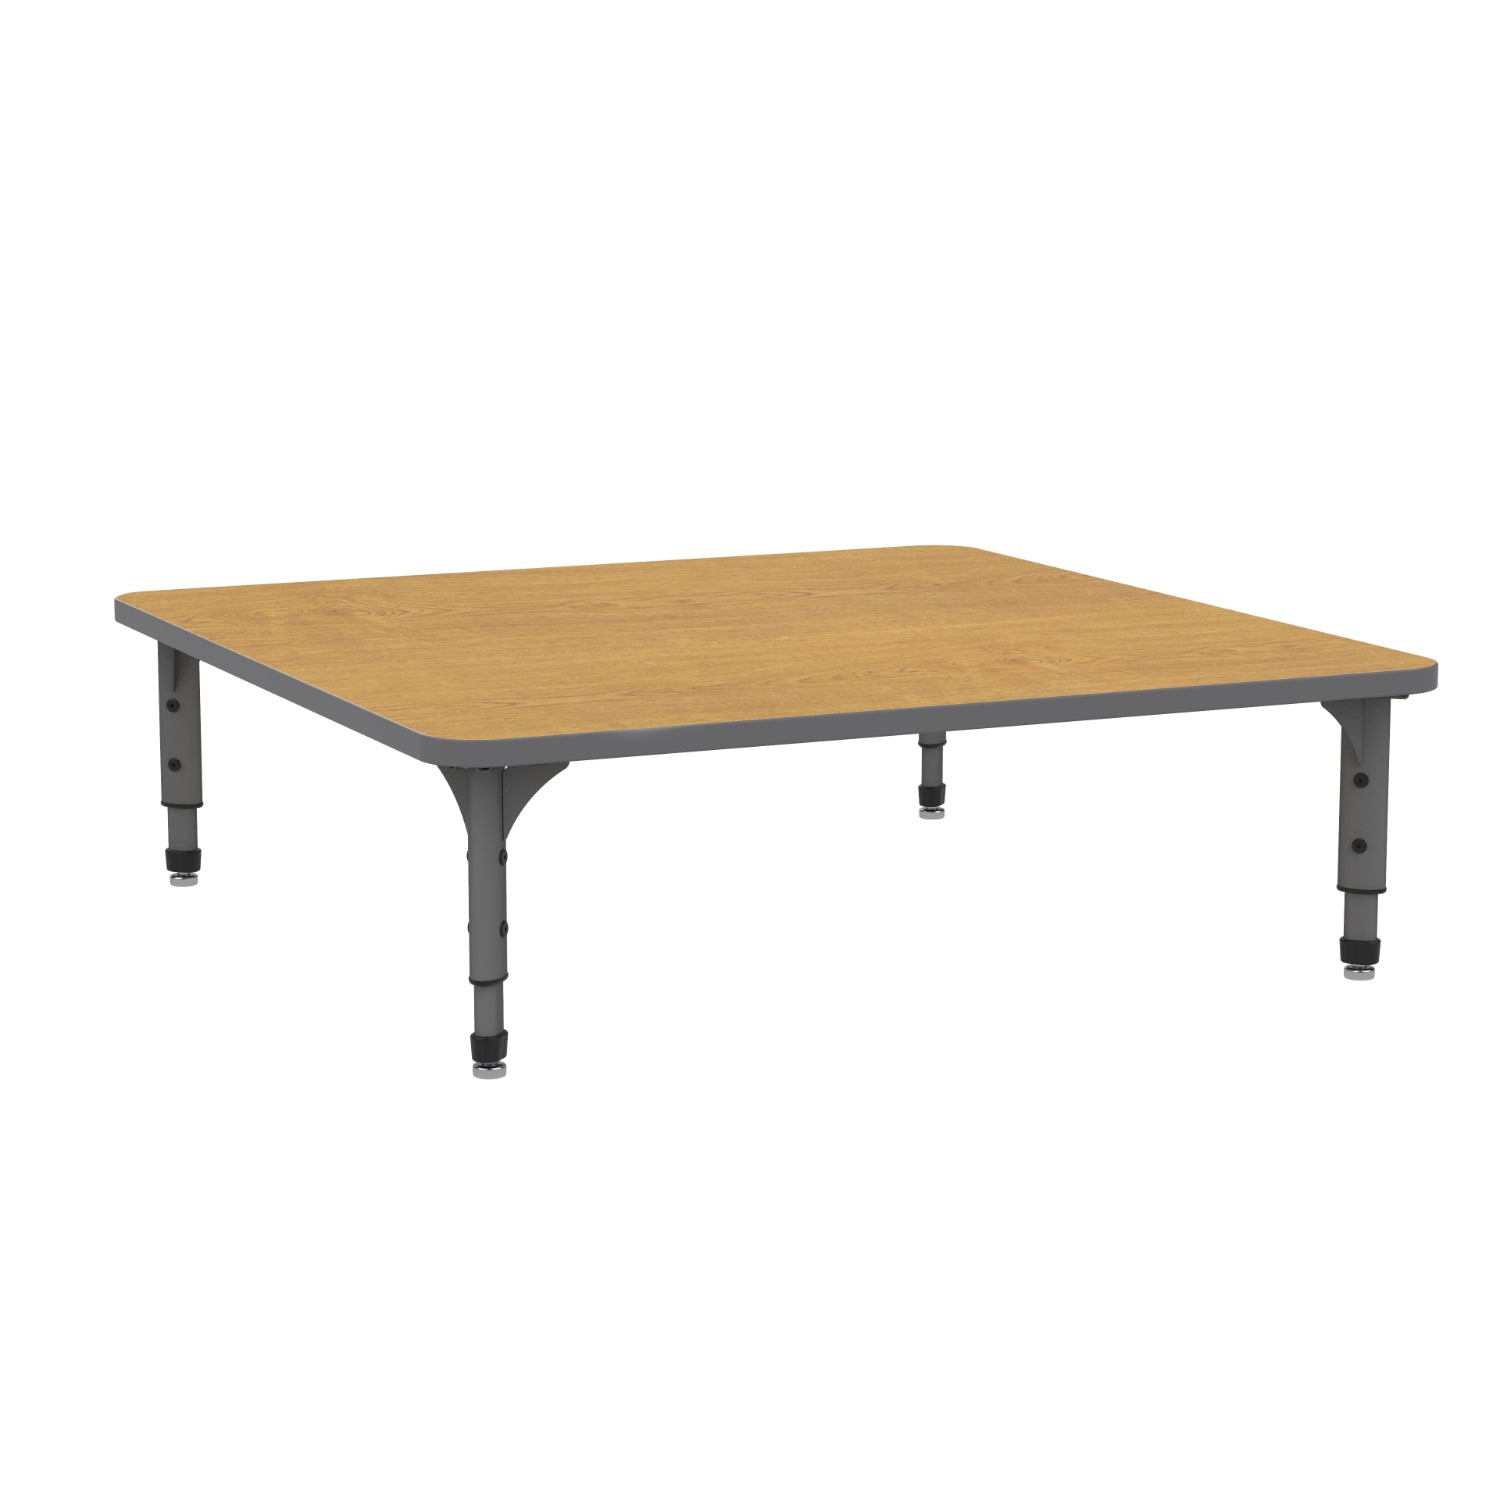 Adjustable Height Floor Activity Table, 48" Square